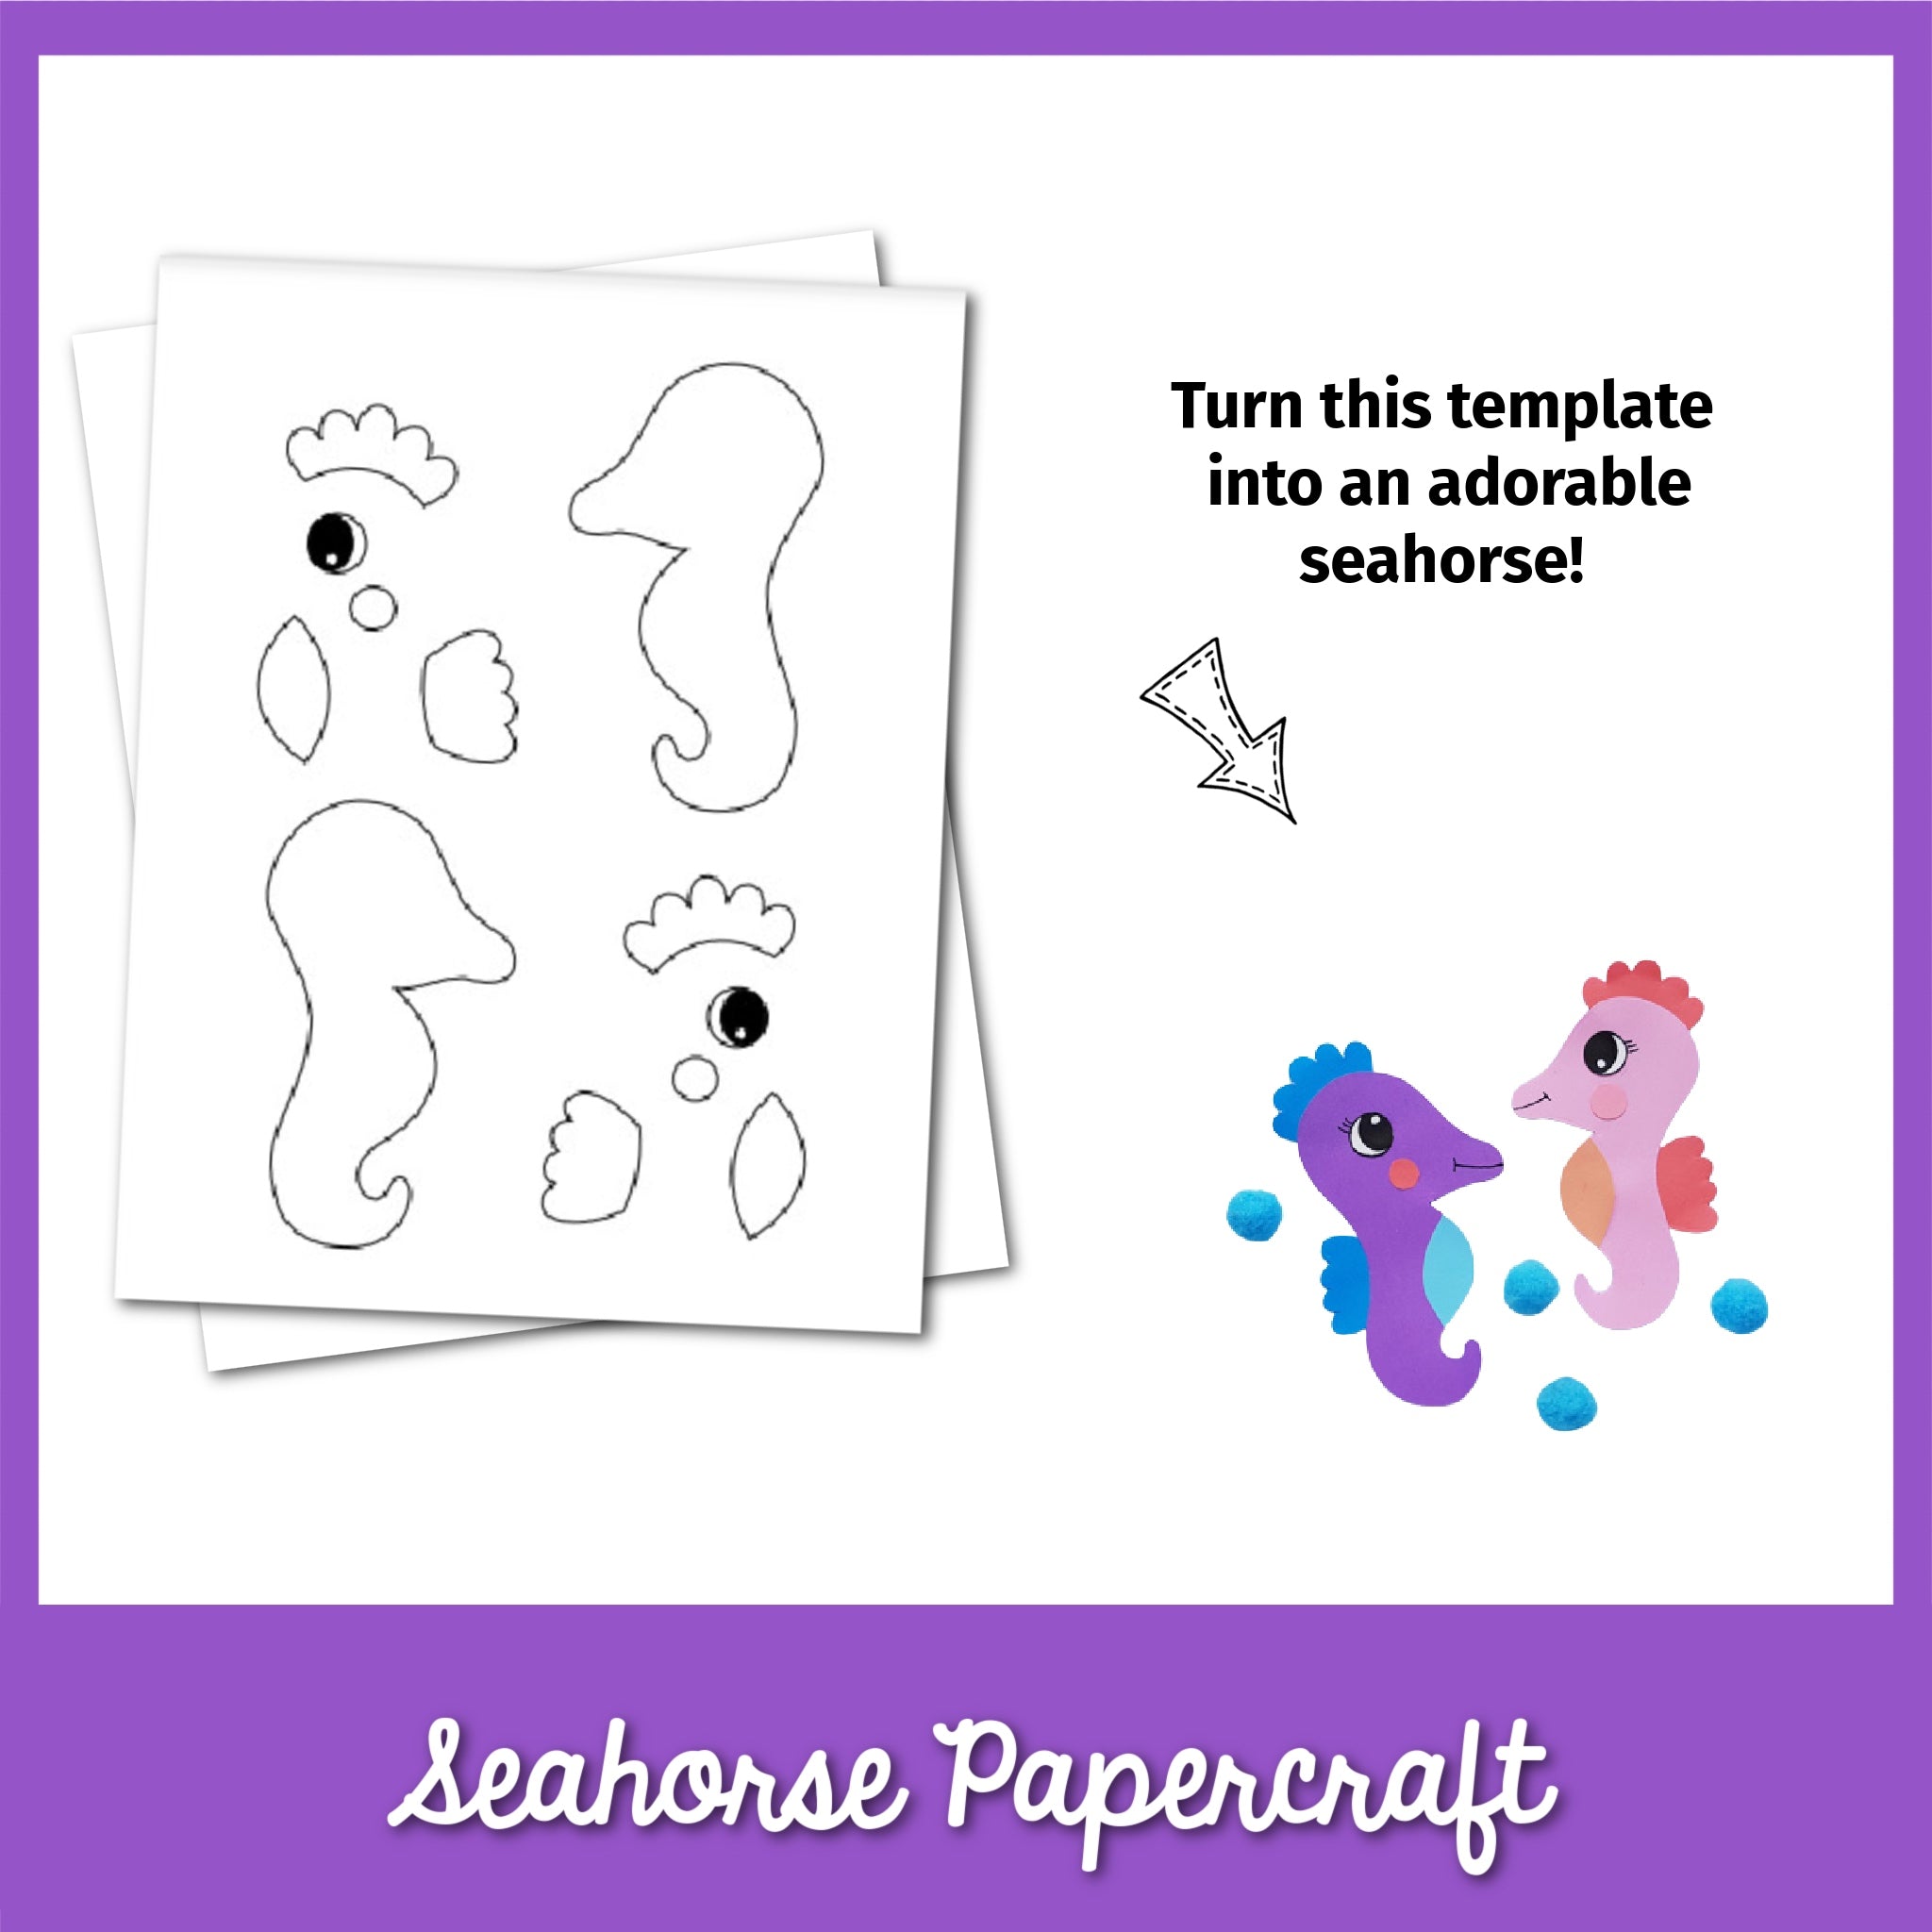 Seahorse Papercraft Template